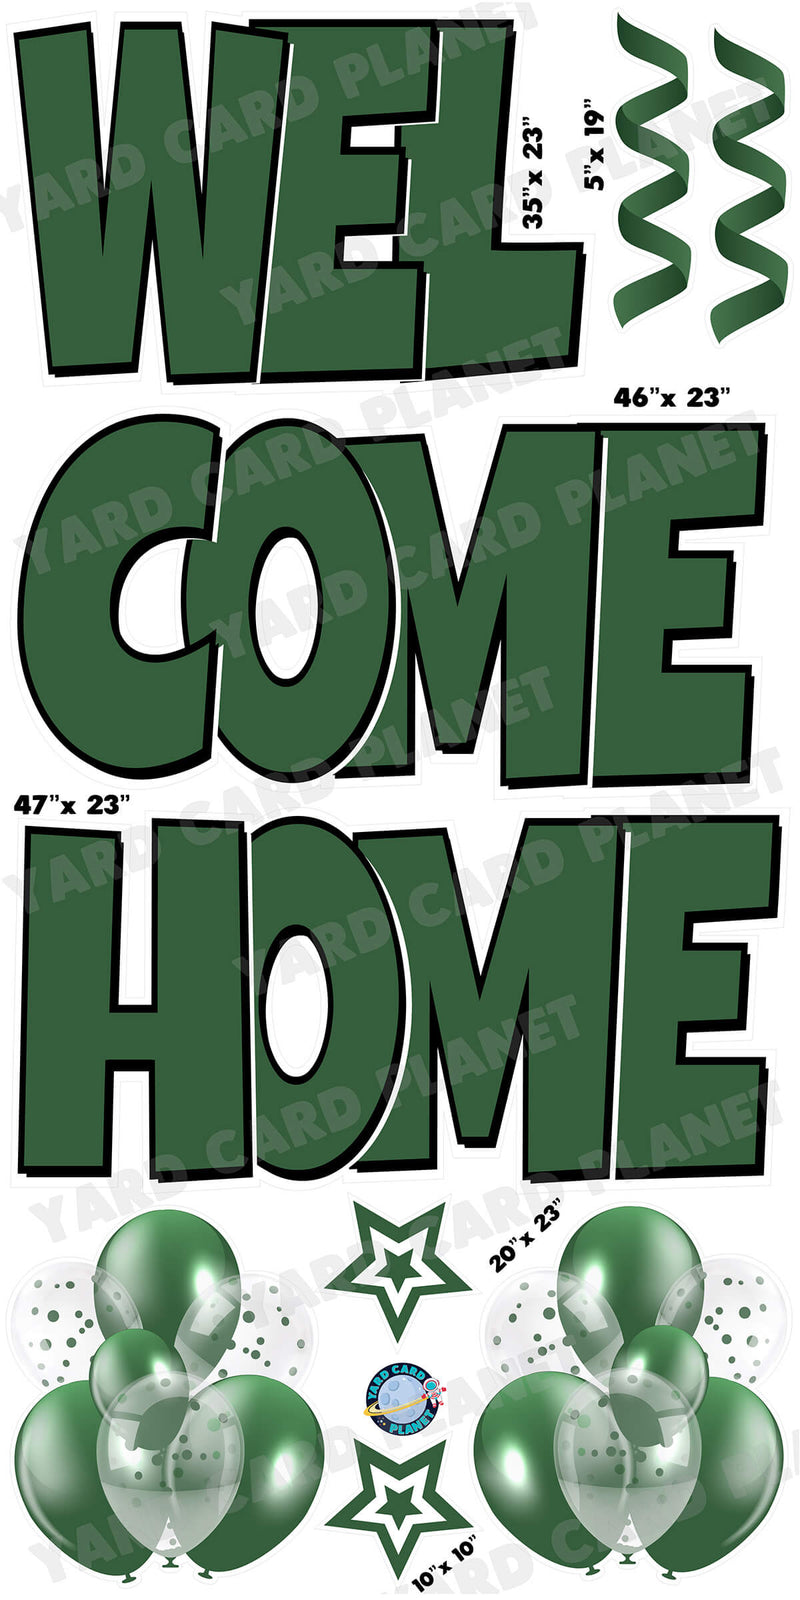 Large 23" Welcome Home Yard Card EZ Quick Sets in Luckiest Guy Font and Flair in Hunter Green Solid Color